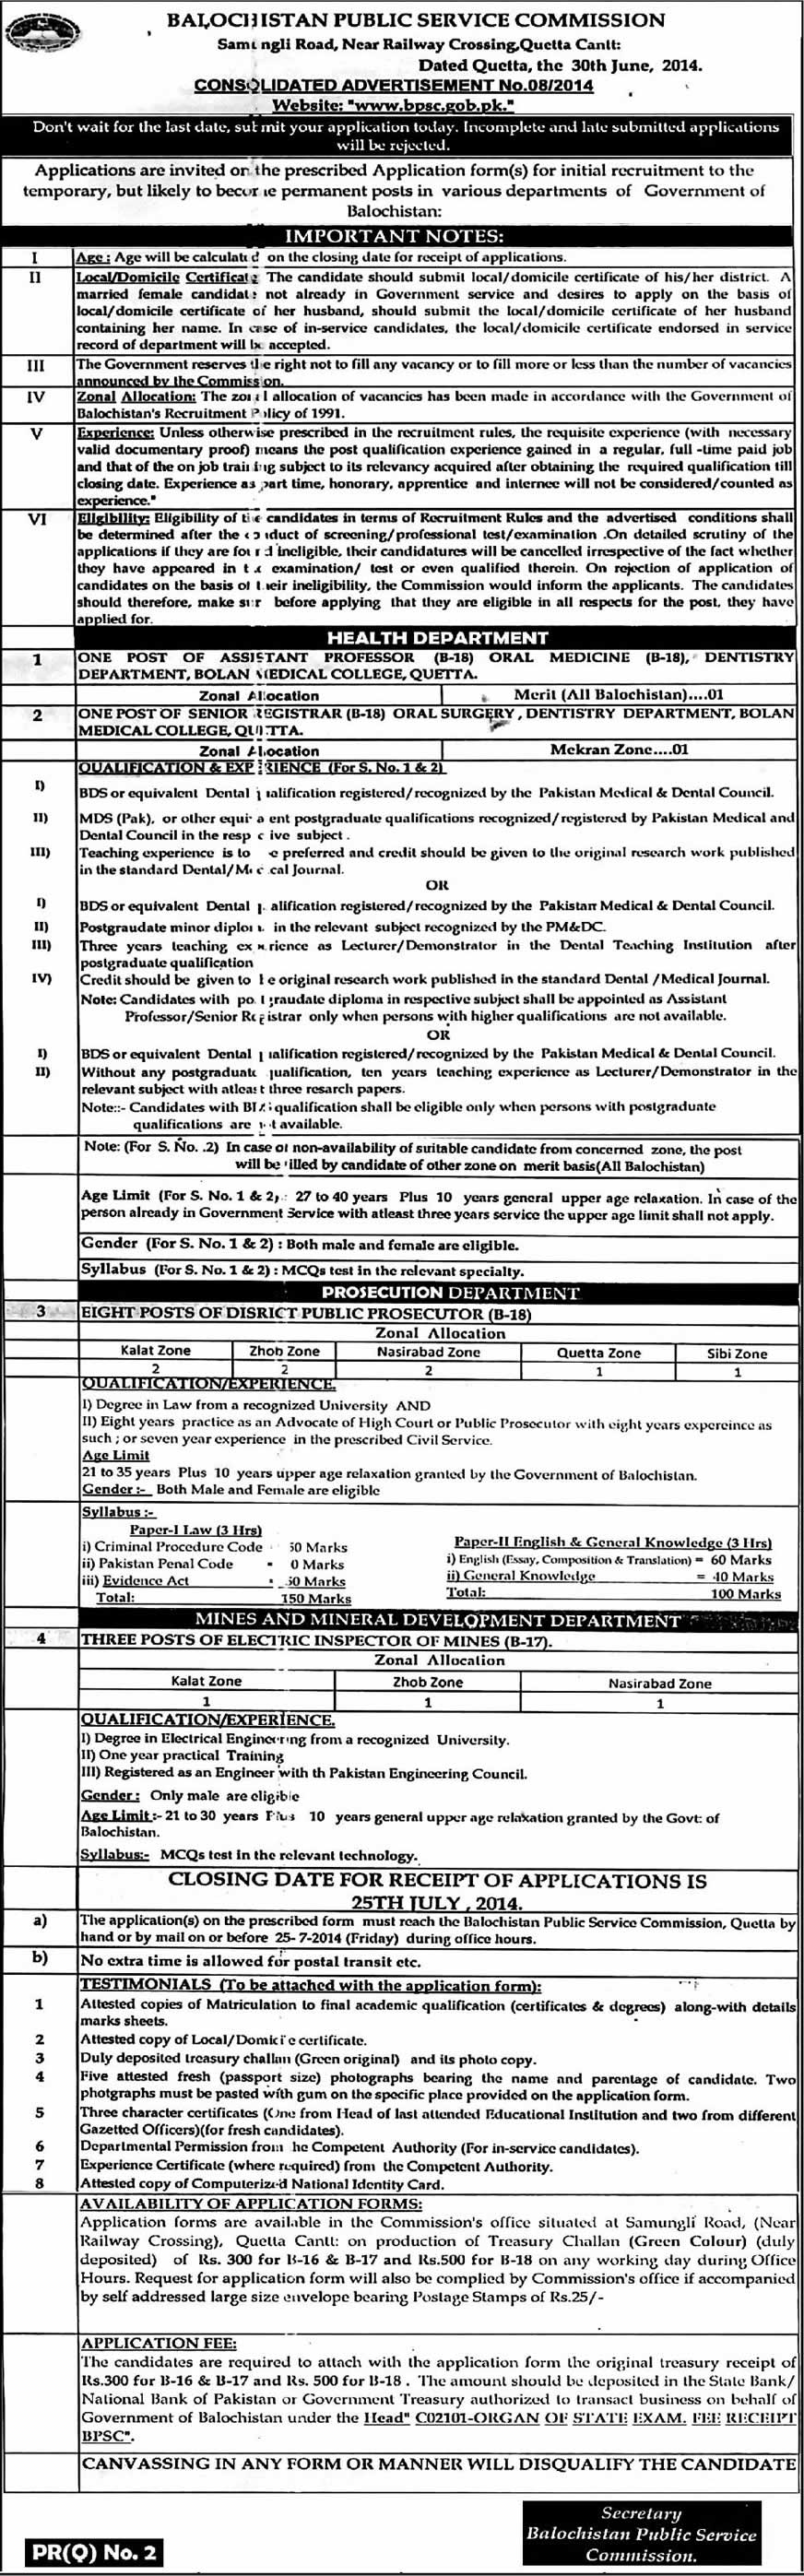 BPSC Jobs July 2014 Latest Consolidated Advertisement 08/2014 (8)